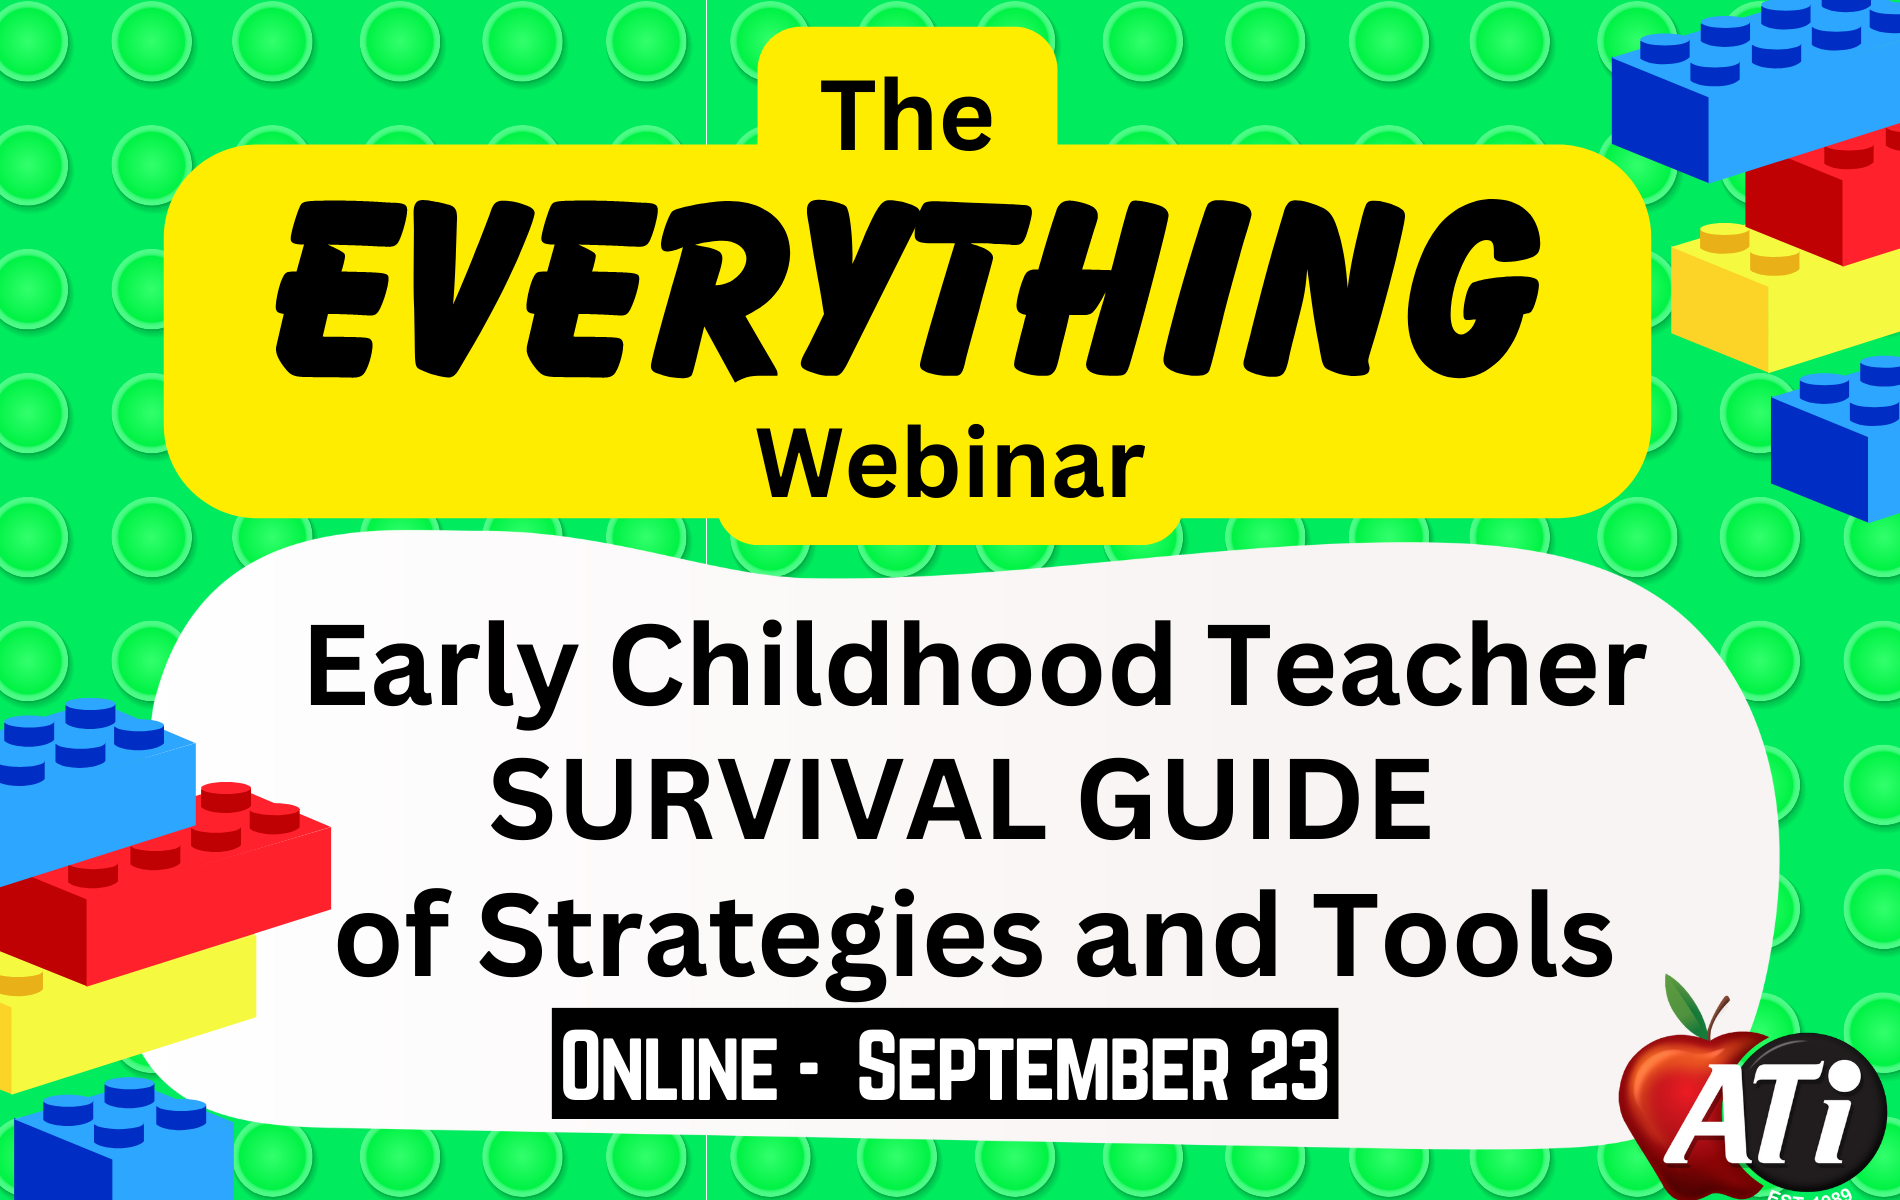 The EVERYTHING Webinar - Online - The Appelbaum Training Institute